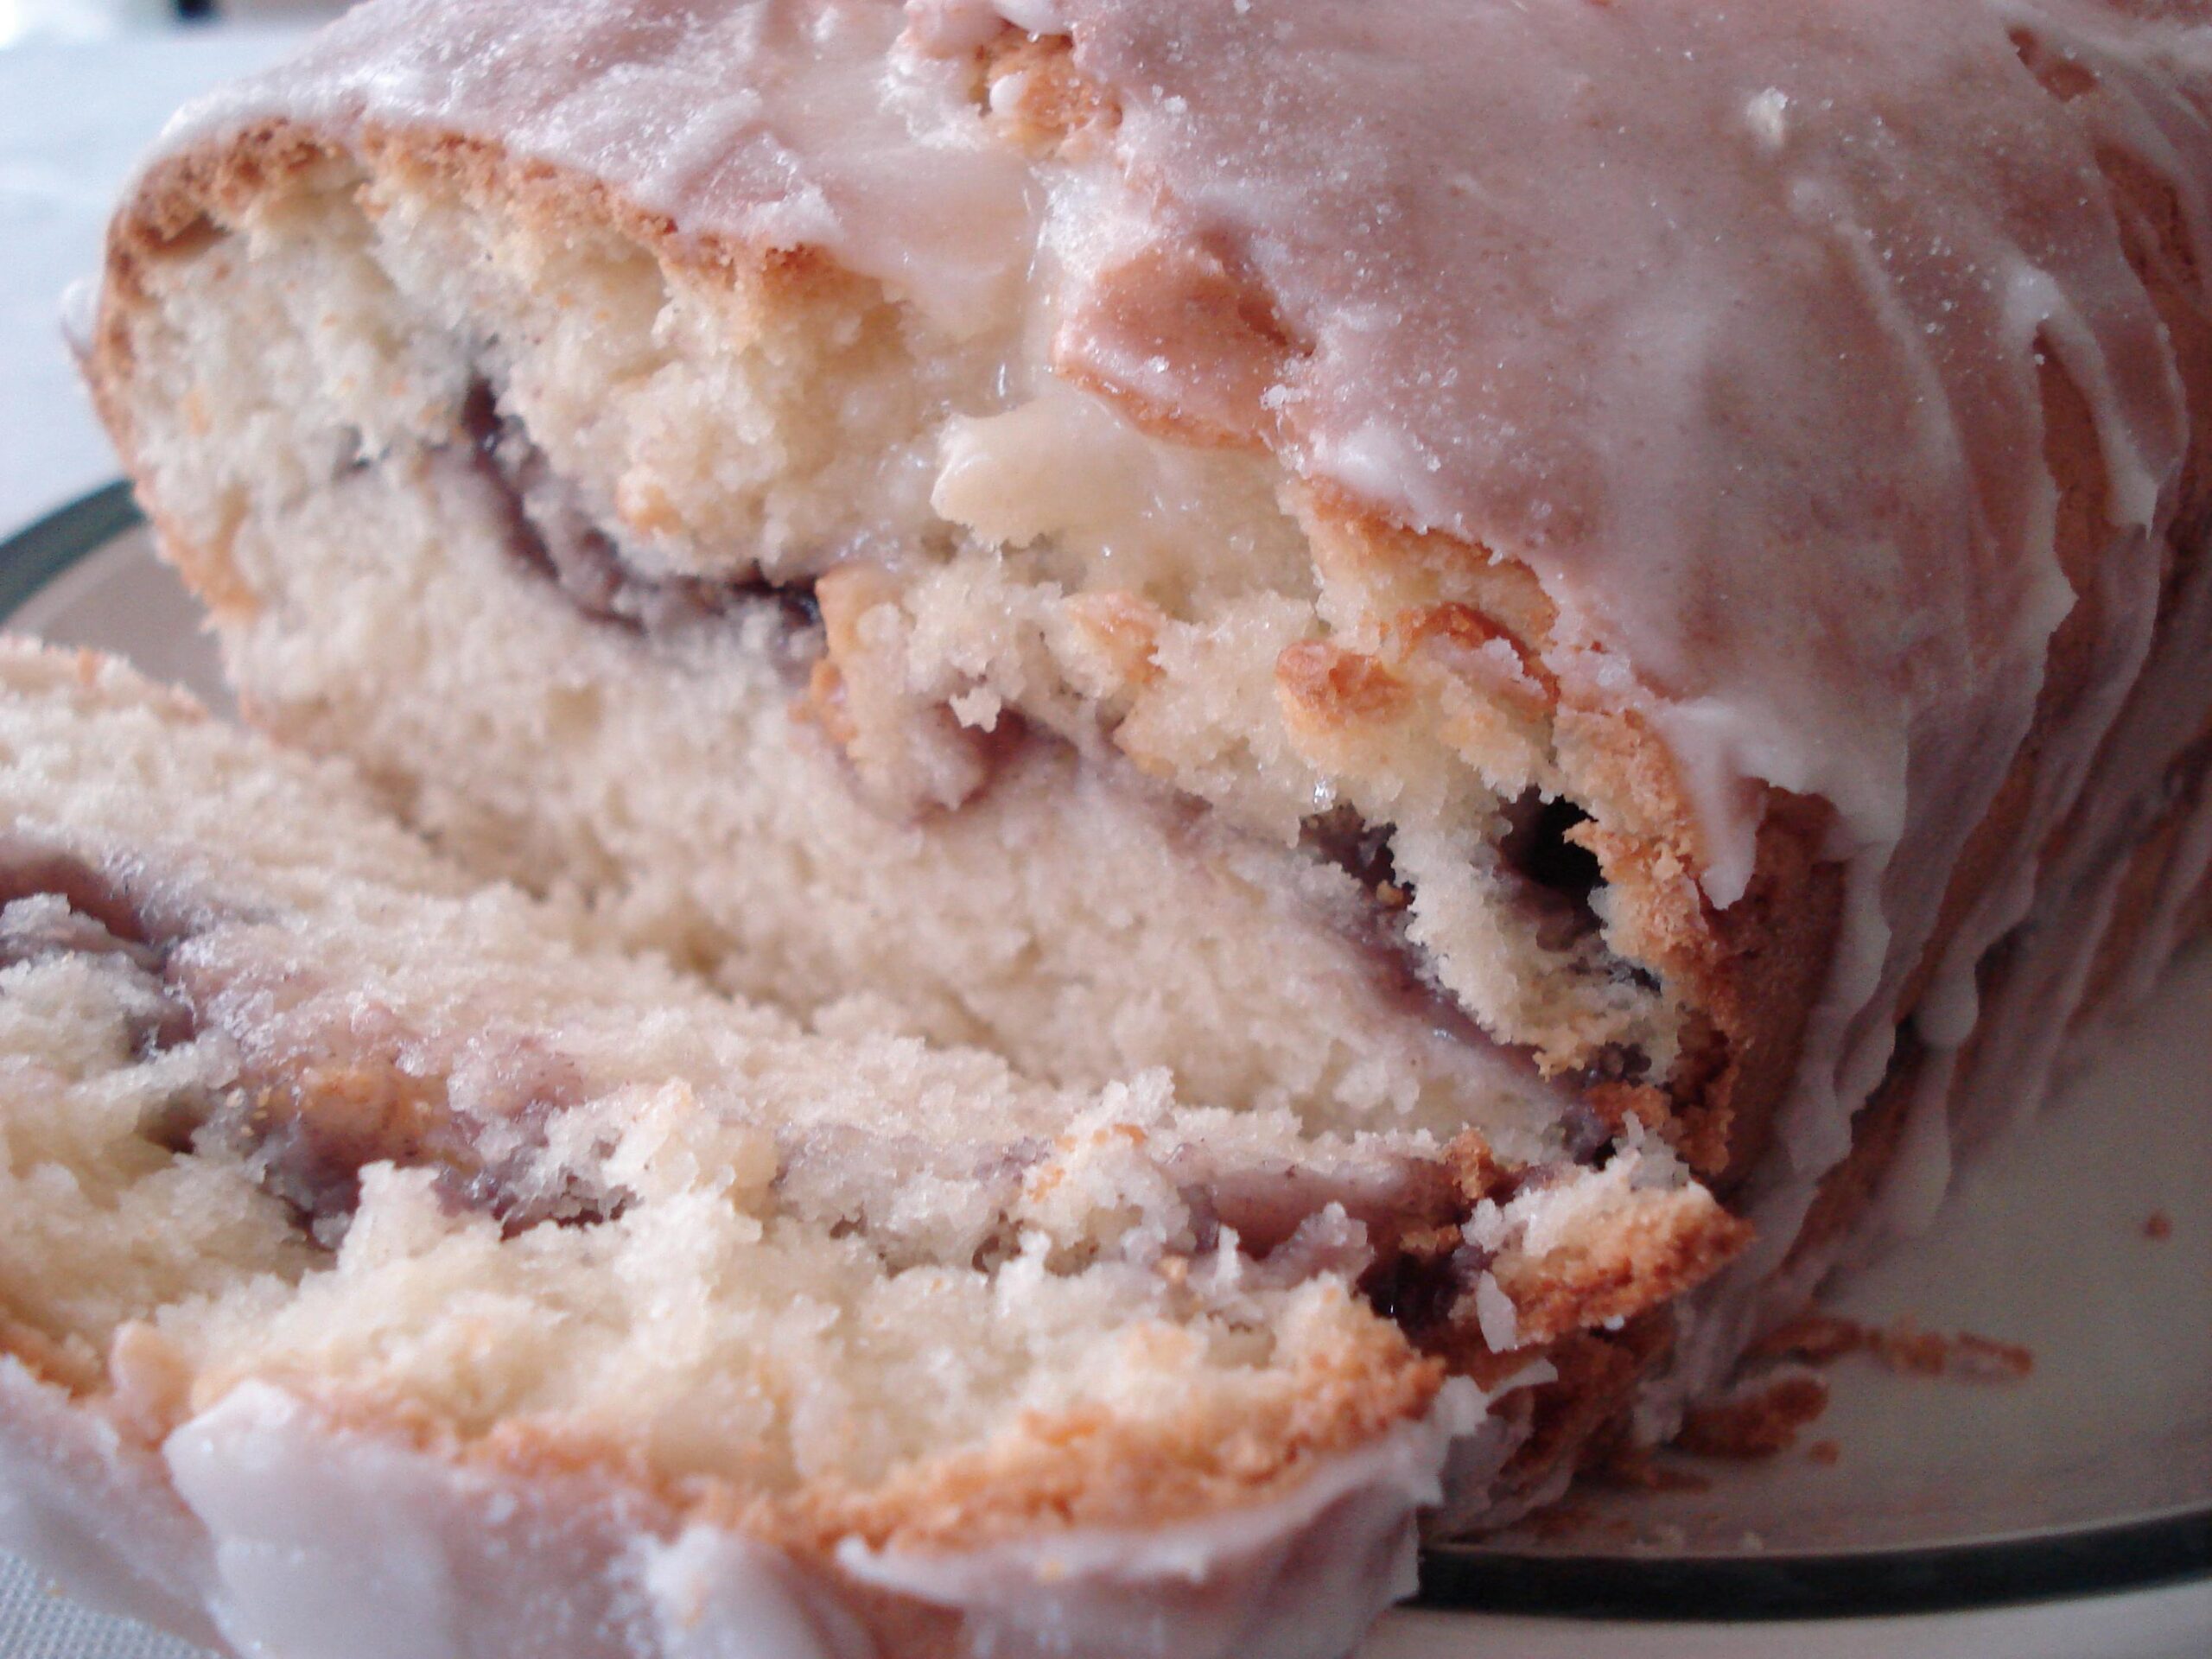  Get lost in the fluffy texture of our Blueberry Coffee Cake.